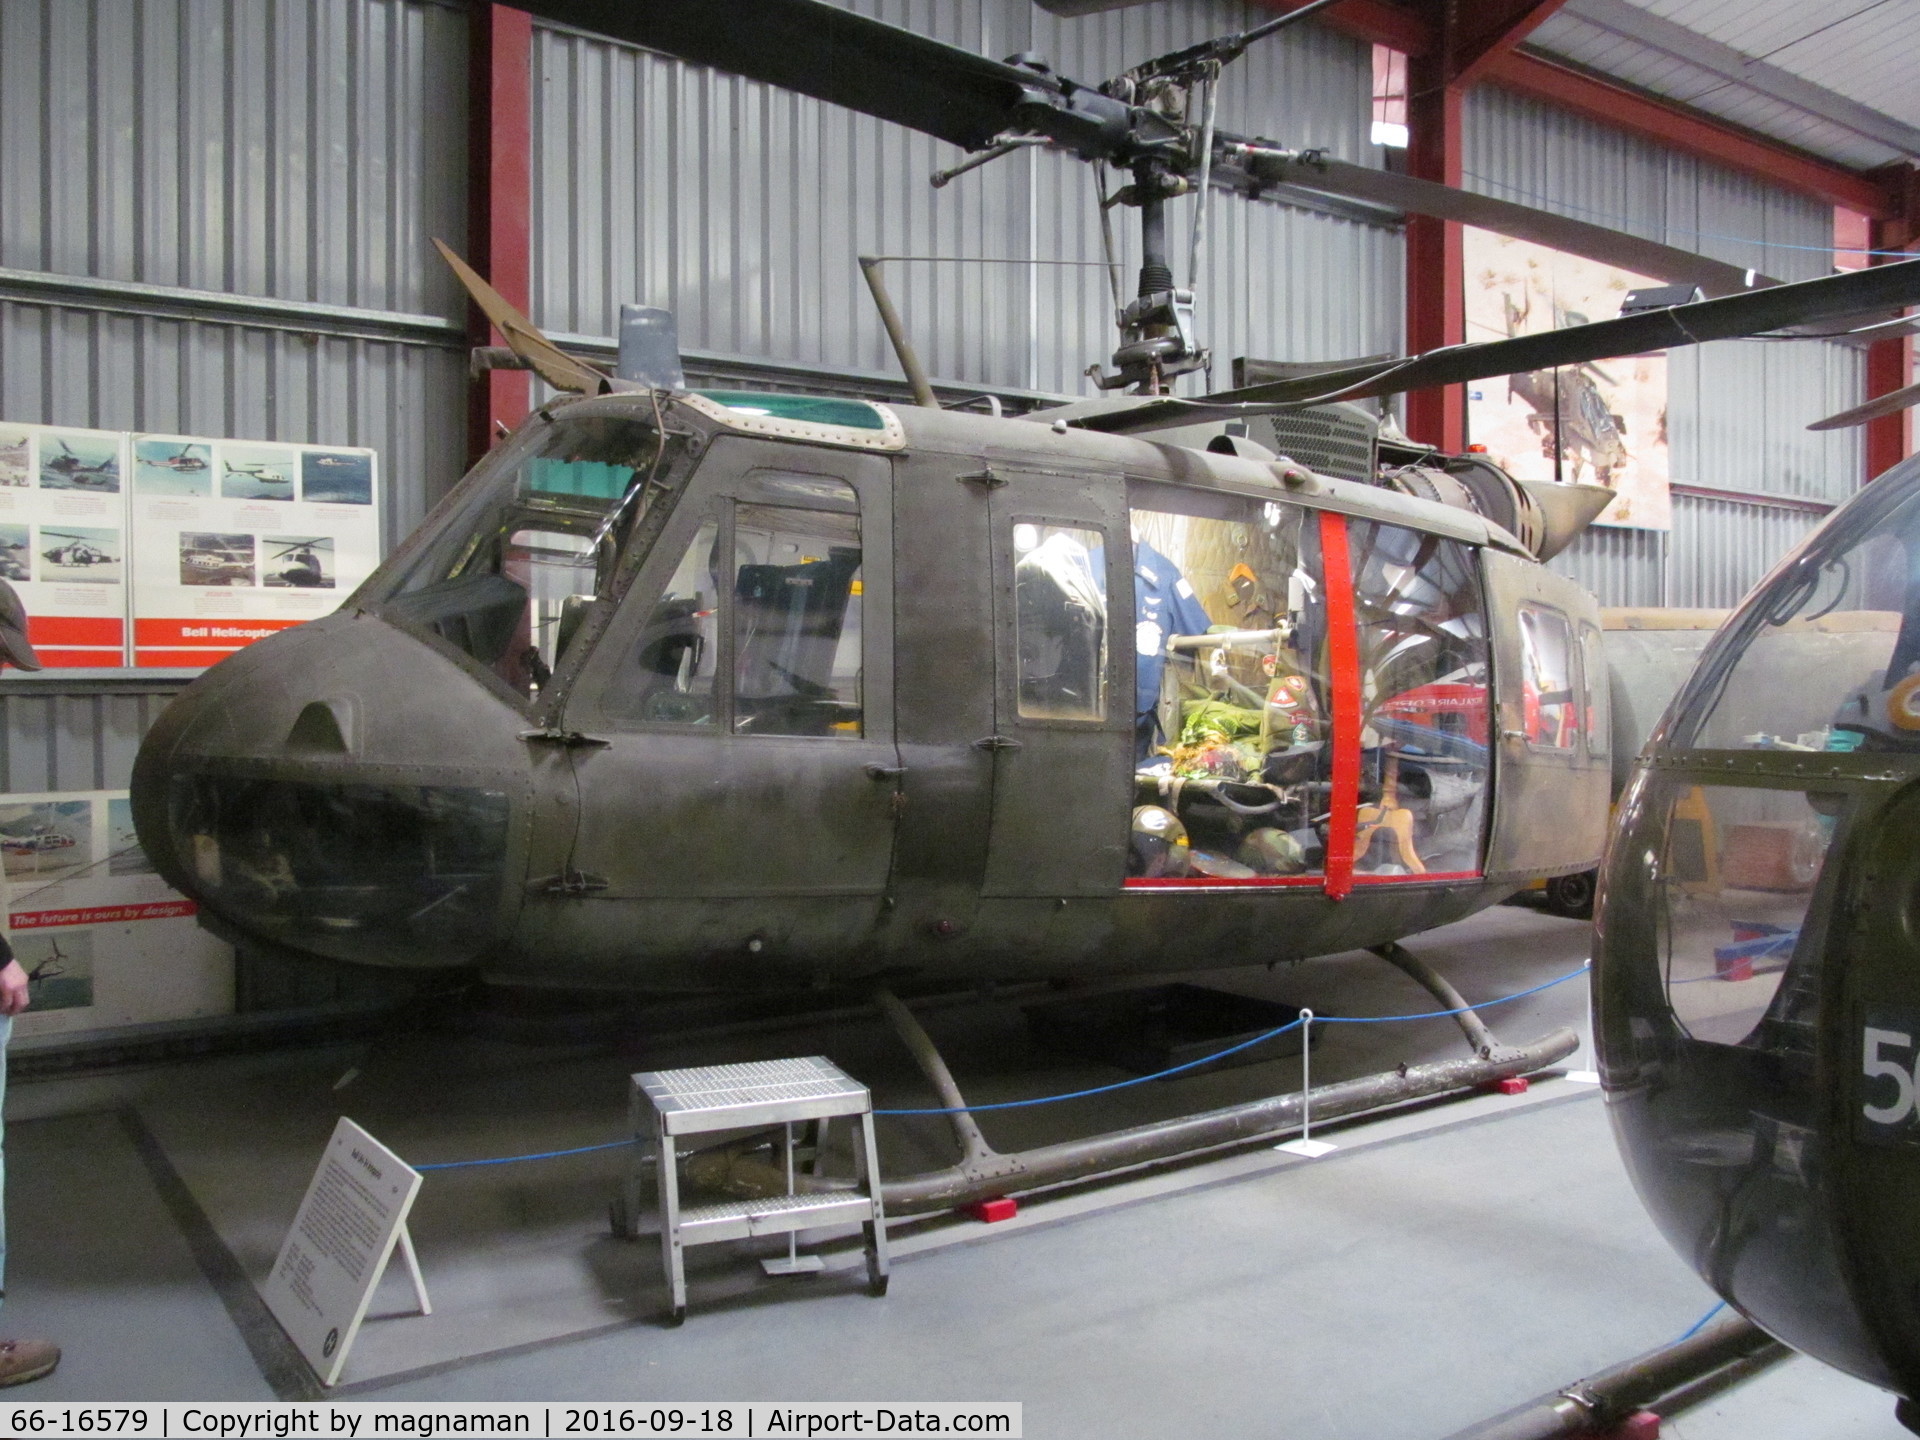 66-16579, 1967 Bell UH-1H Iroquois C/N 8773, At the best helicopter museum in world! The Helicopter Museum, Weston-super-Mare, UK.